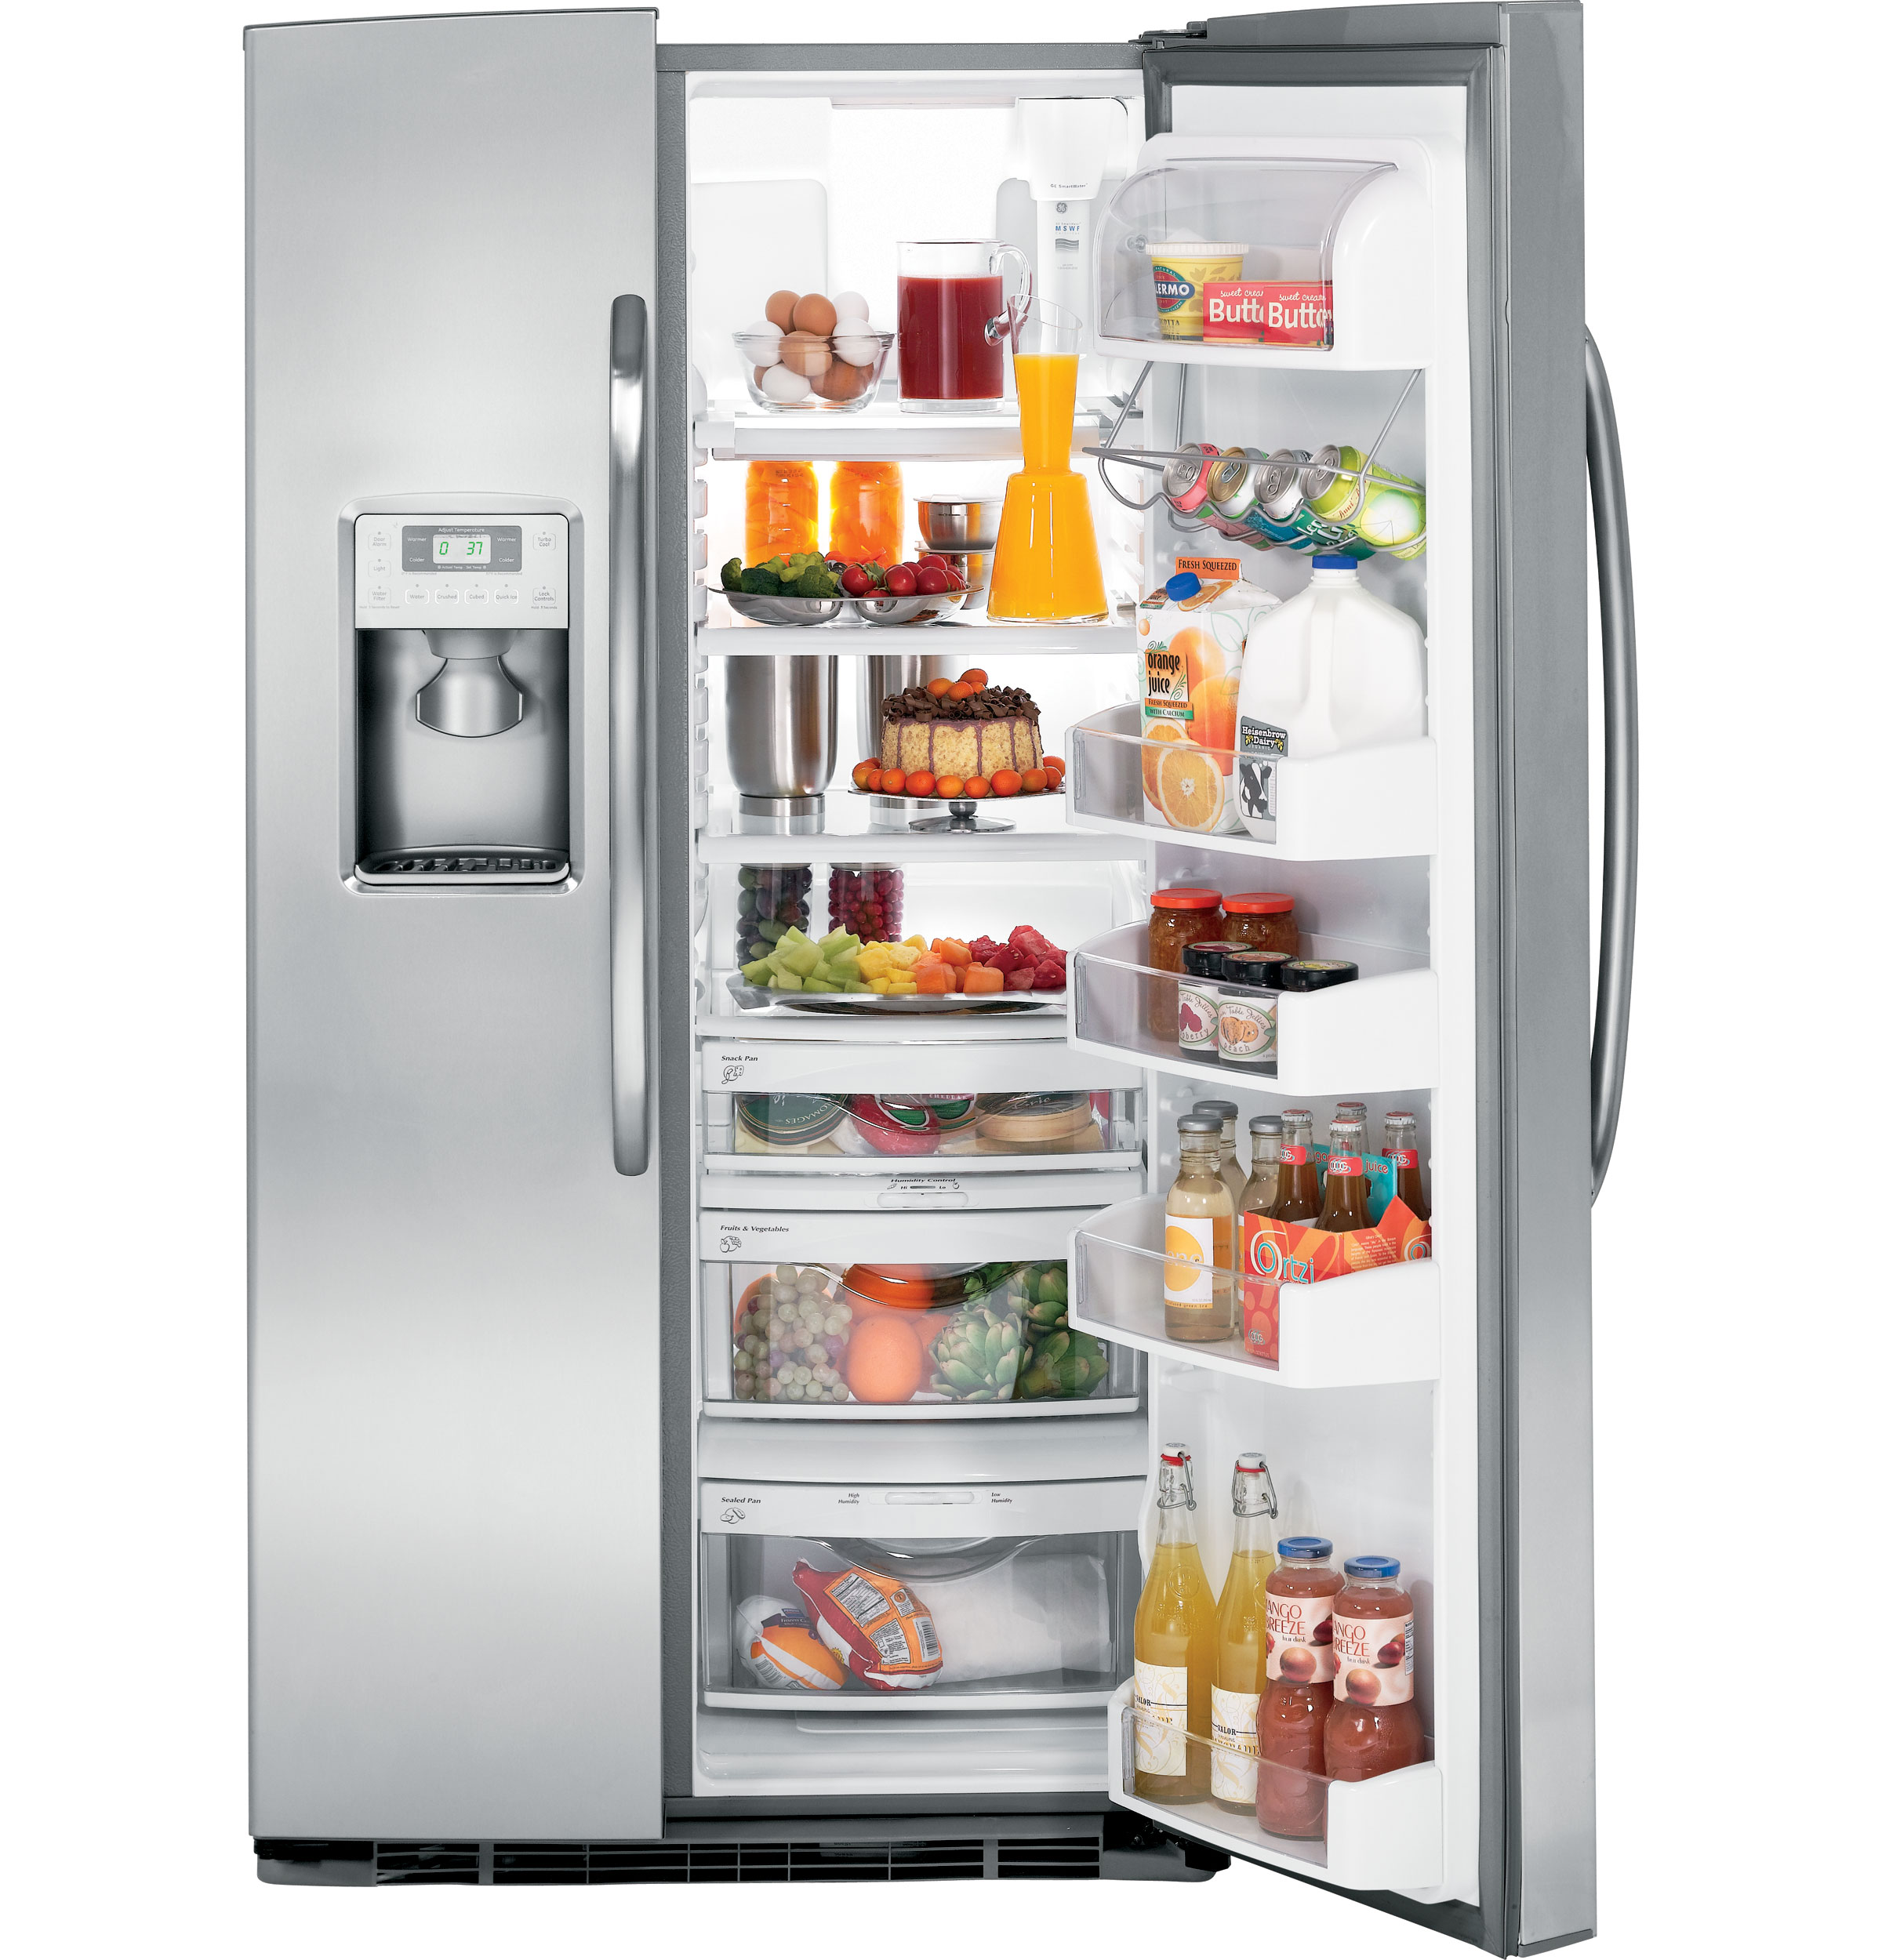 GE® ENERGY STAR® 25.8 Cu. Ft. Side-By-Side Refrigerator with Dispenser